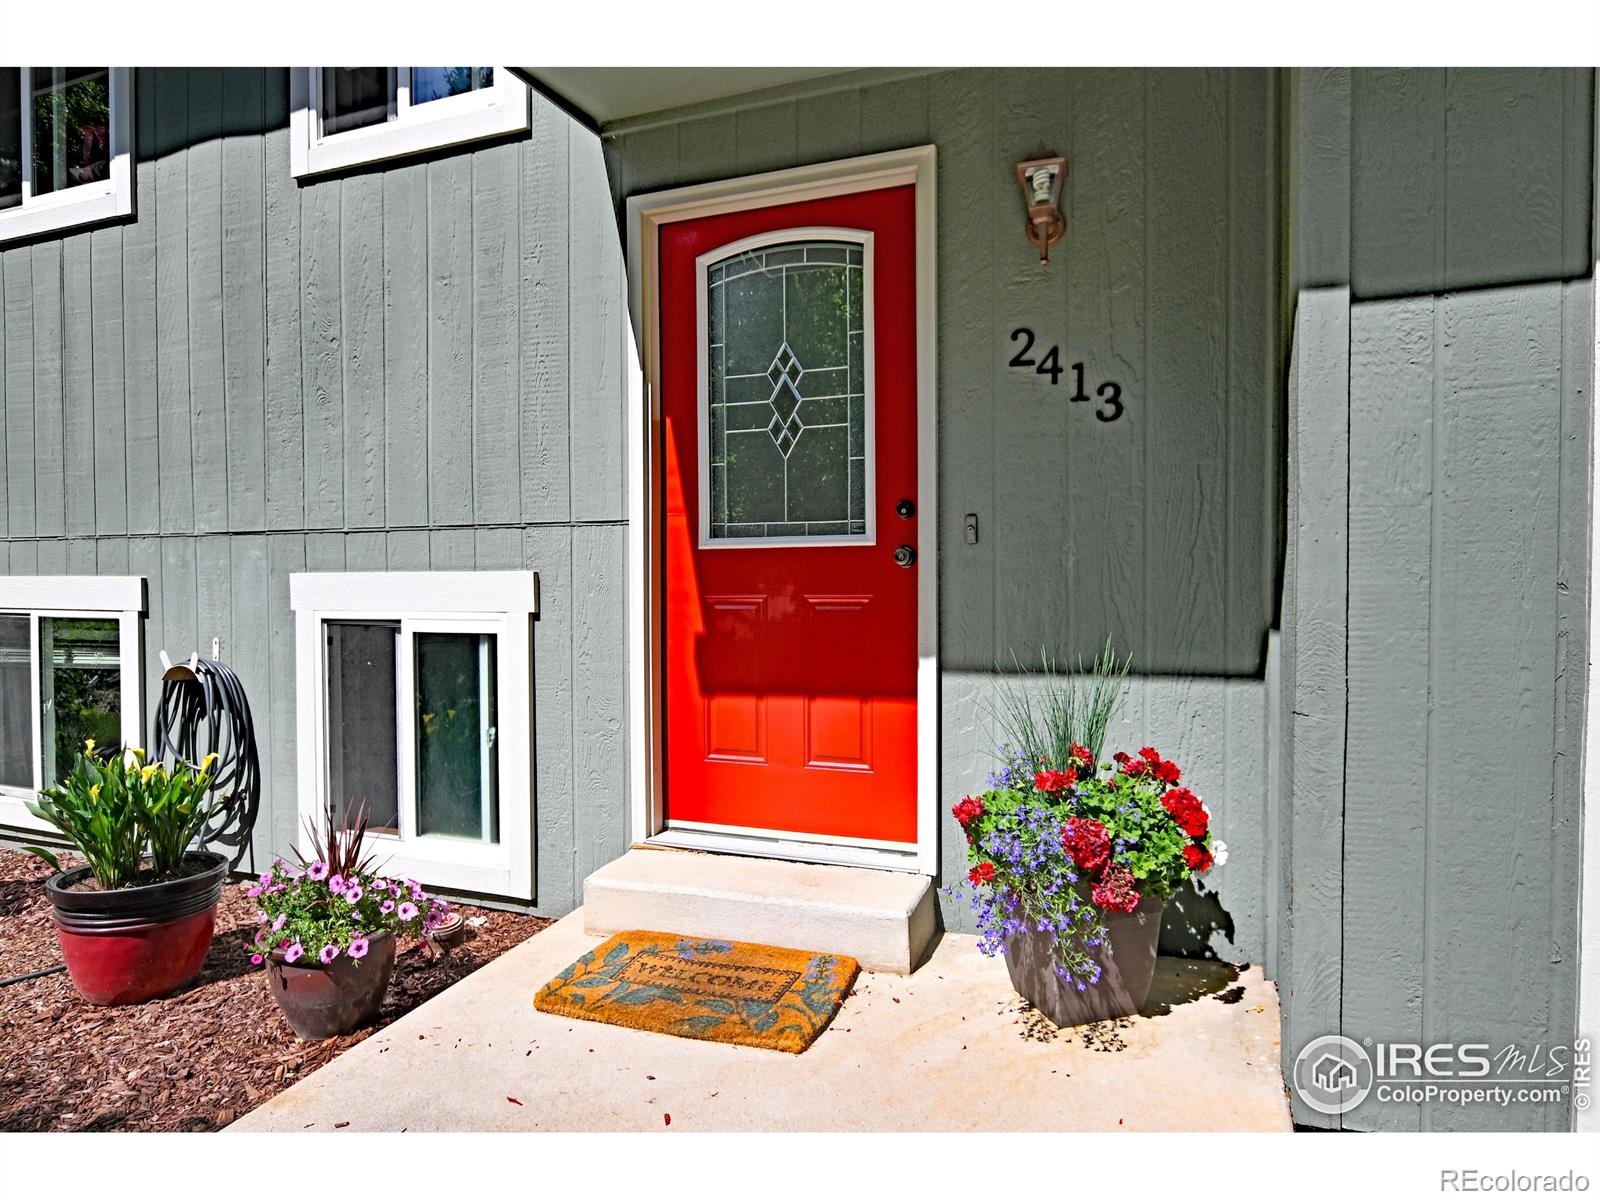 Report Image for 2413  Marquette Street,Fort Collins, Colorado